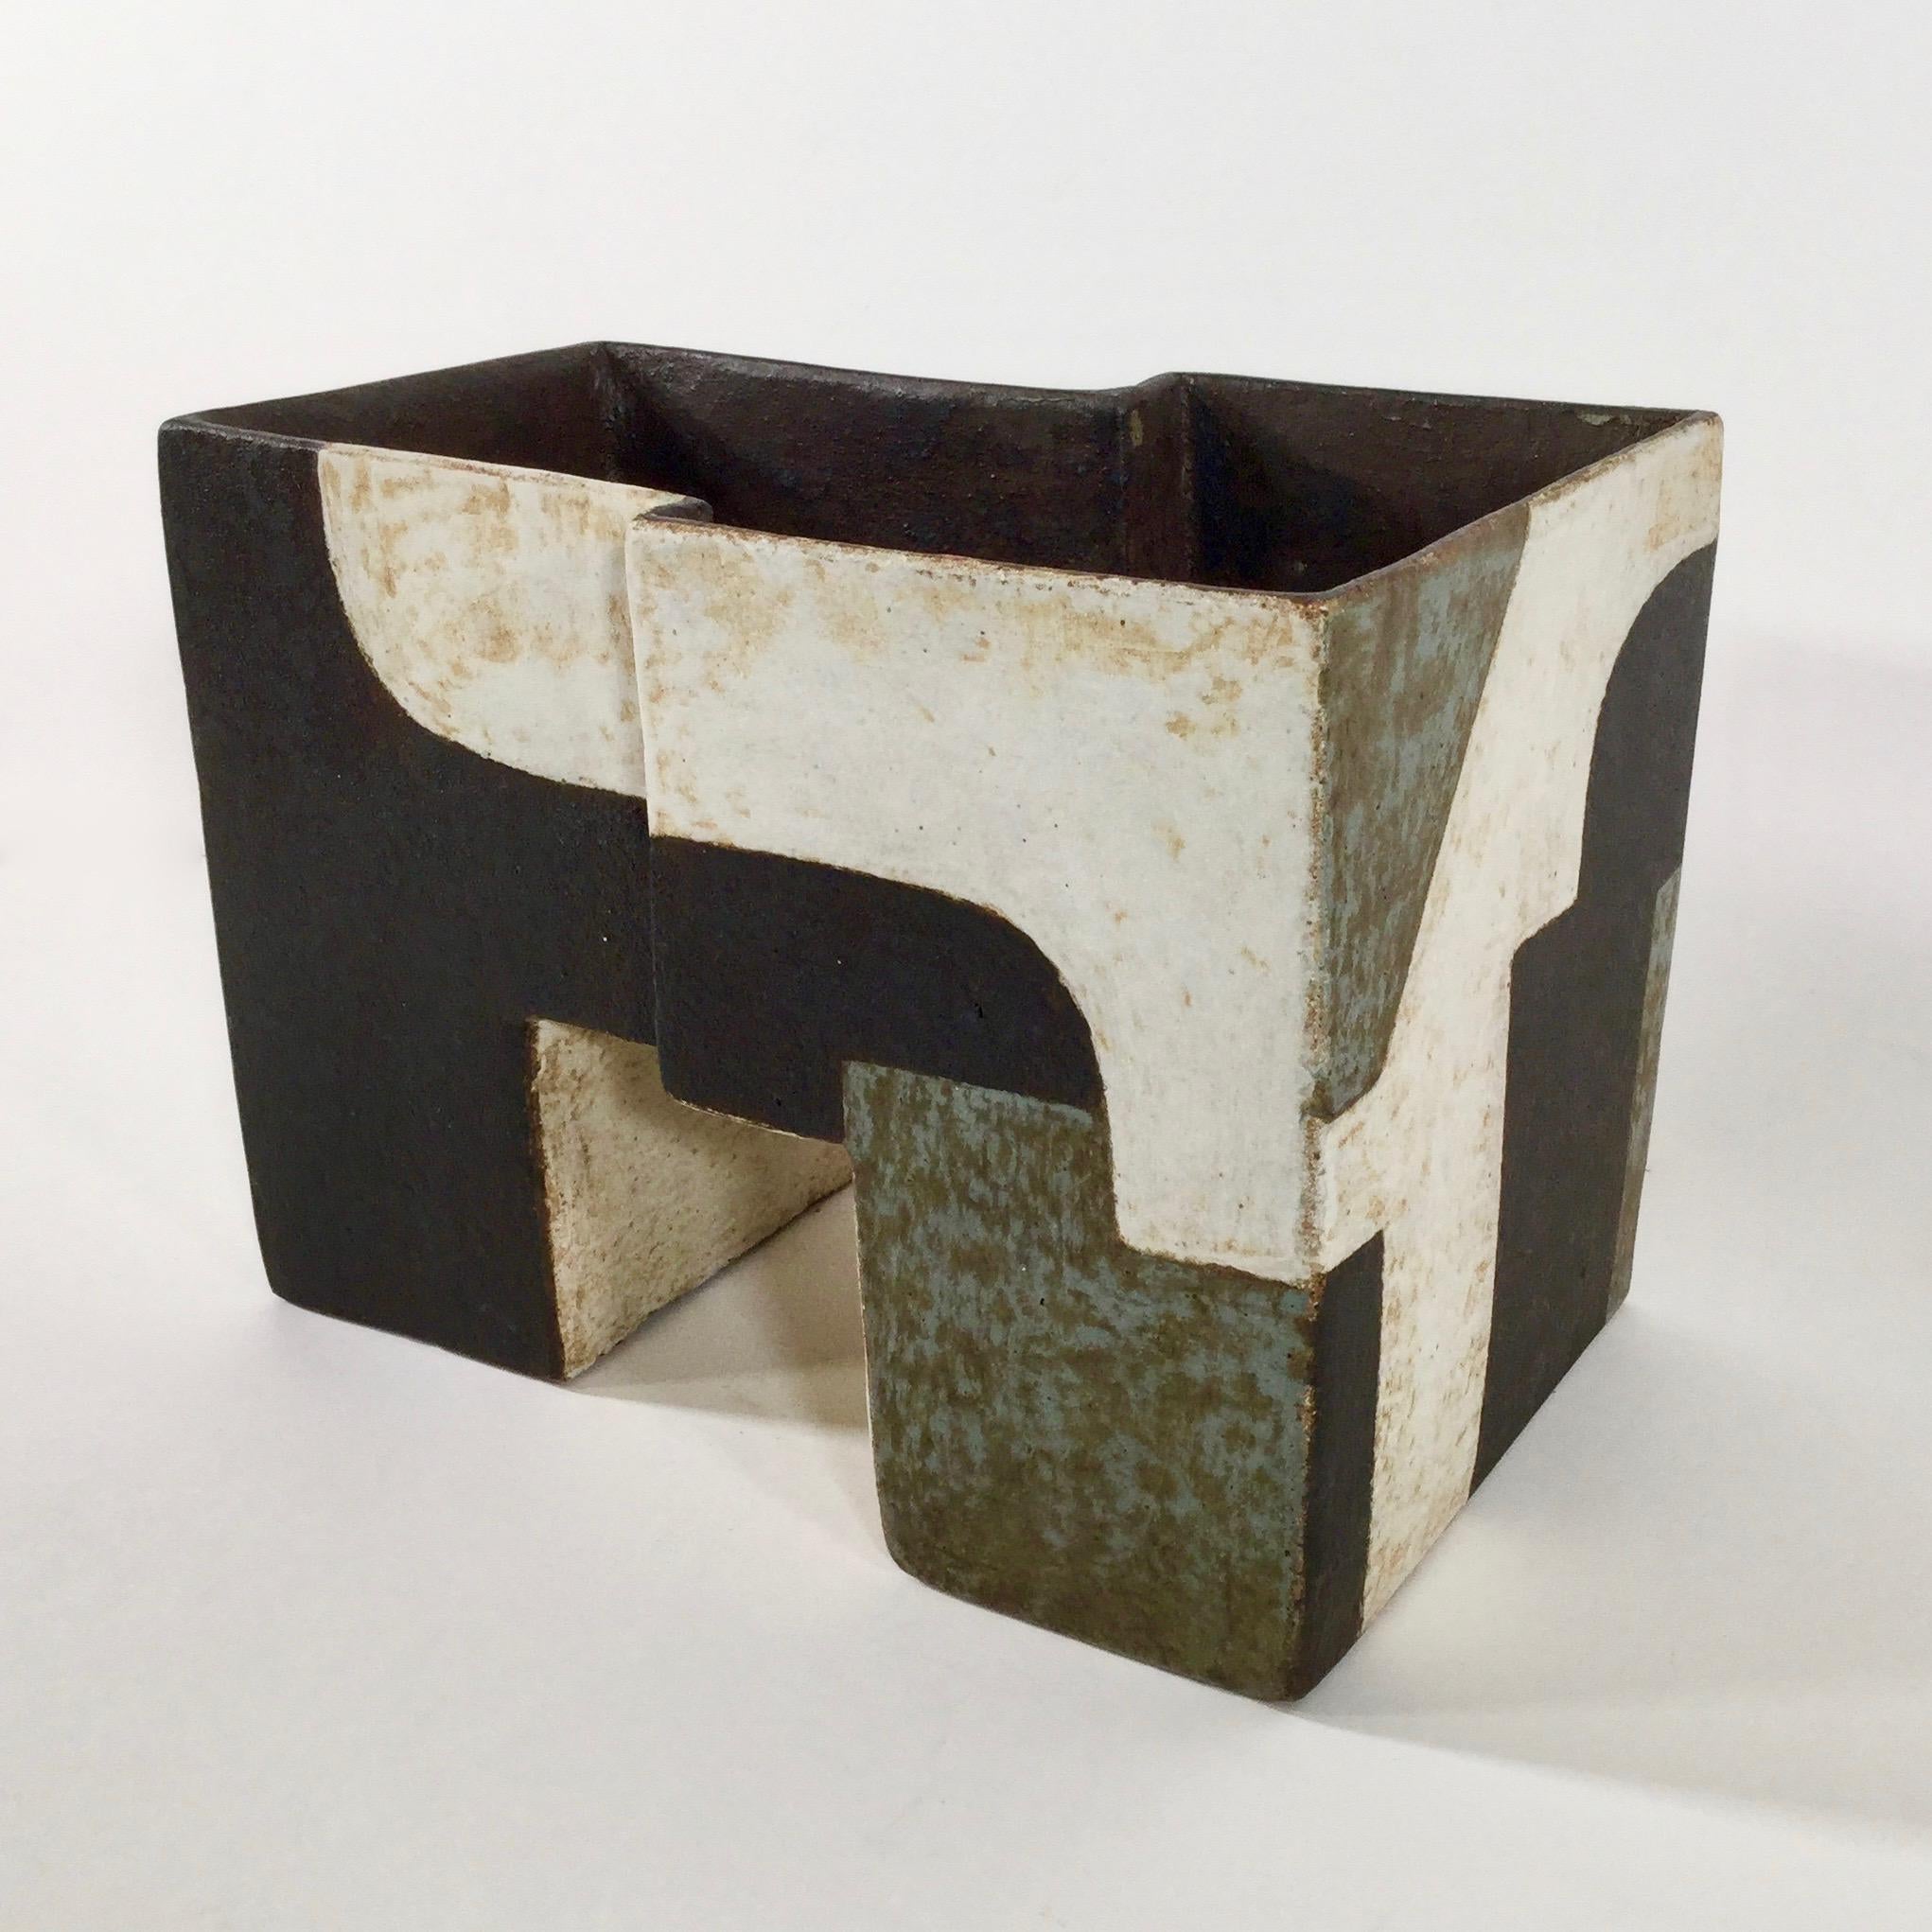 Paul Philp has been a leading ceramicist for over forty years, making pots that look to be “discovered rather than made”. 
 
In the 1970s, Philp was a visiting lecturer at the Central School of Art in London and at Bath School of Art, Corsham. He